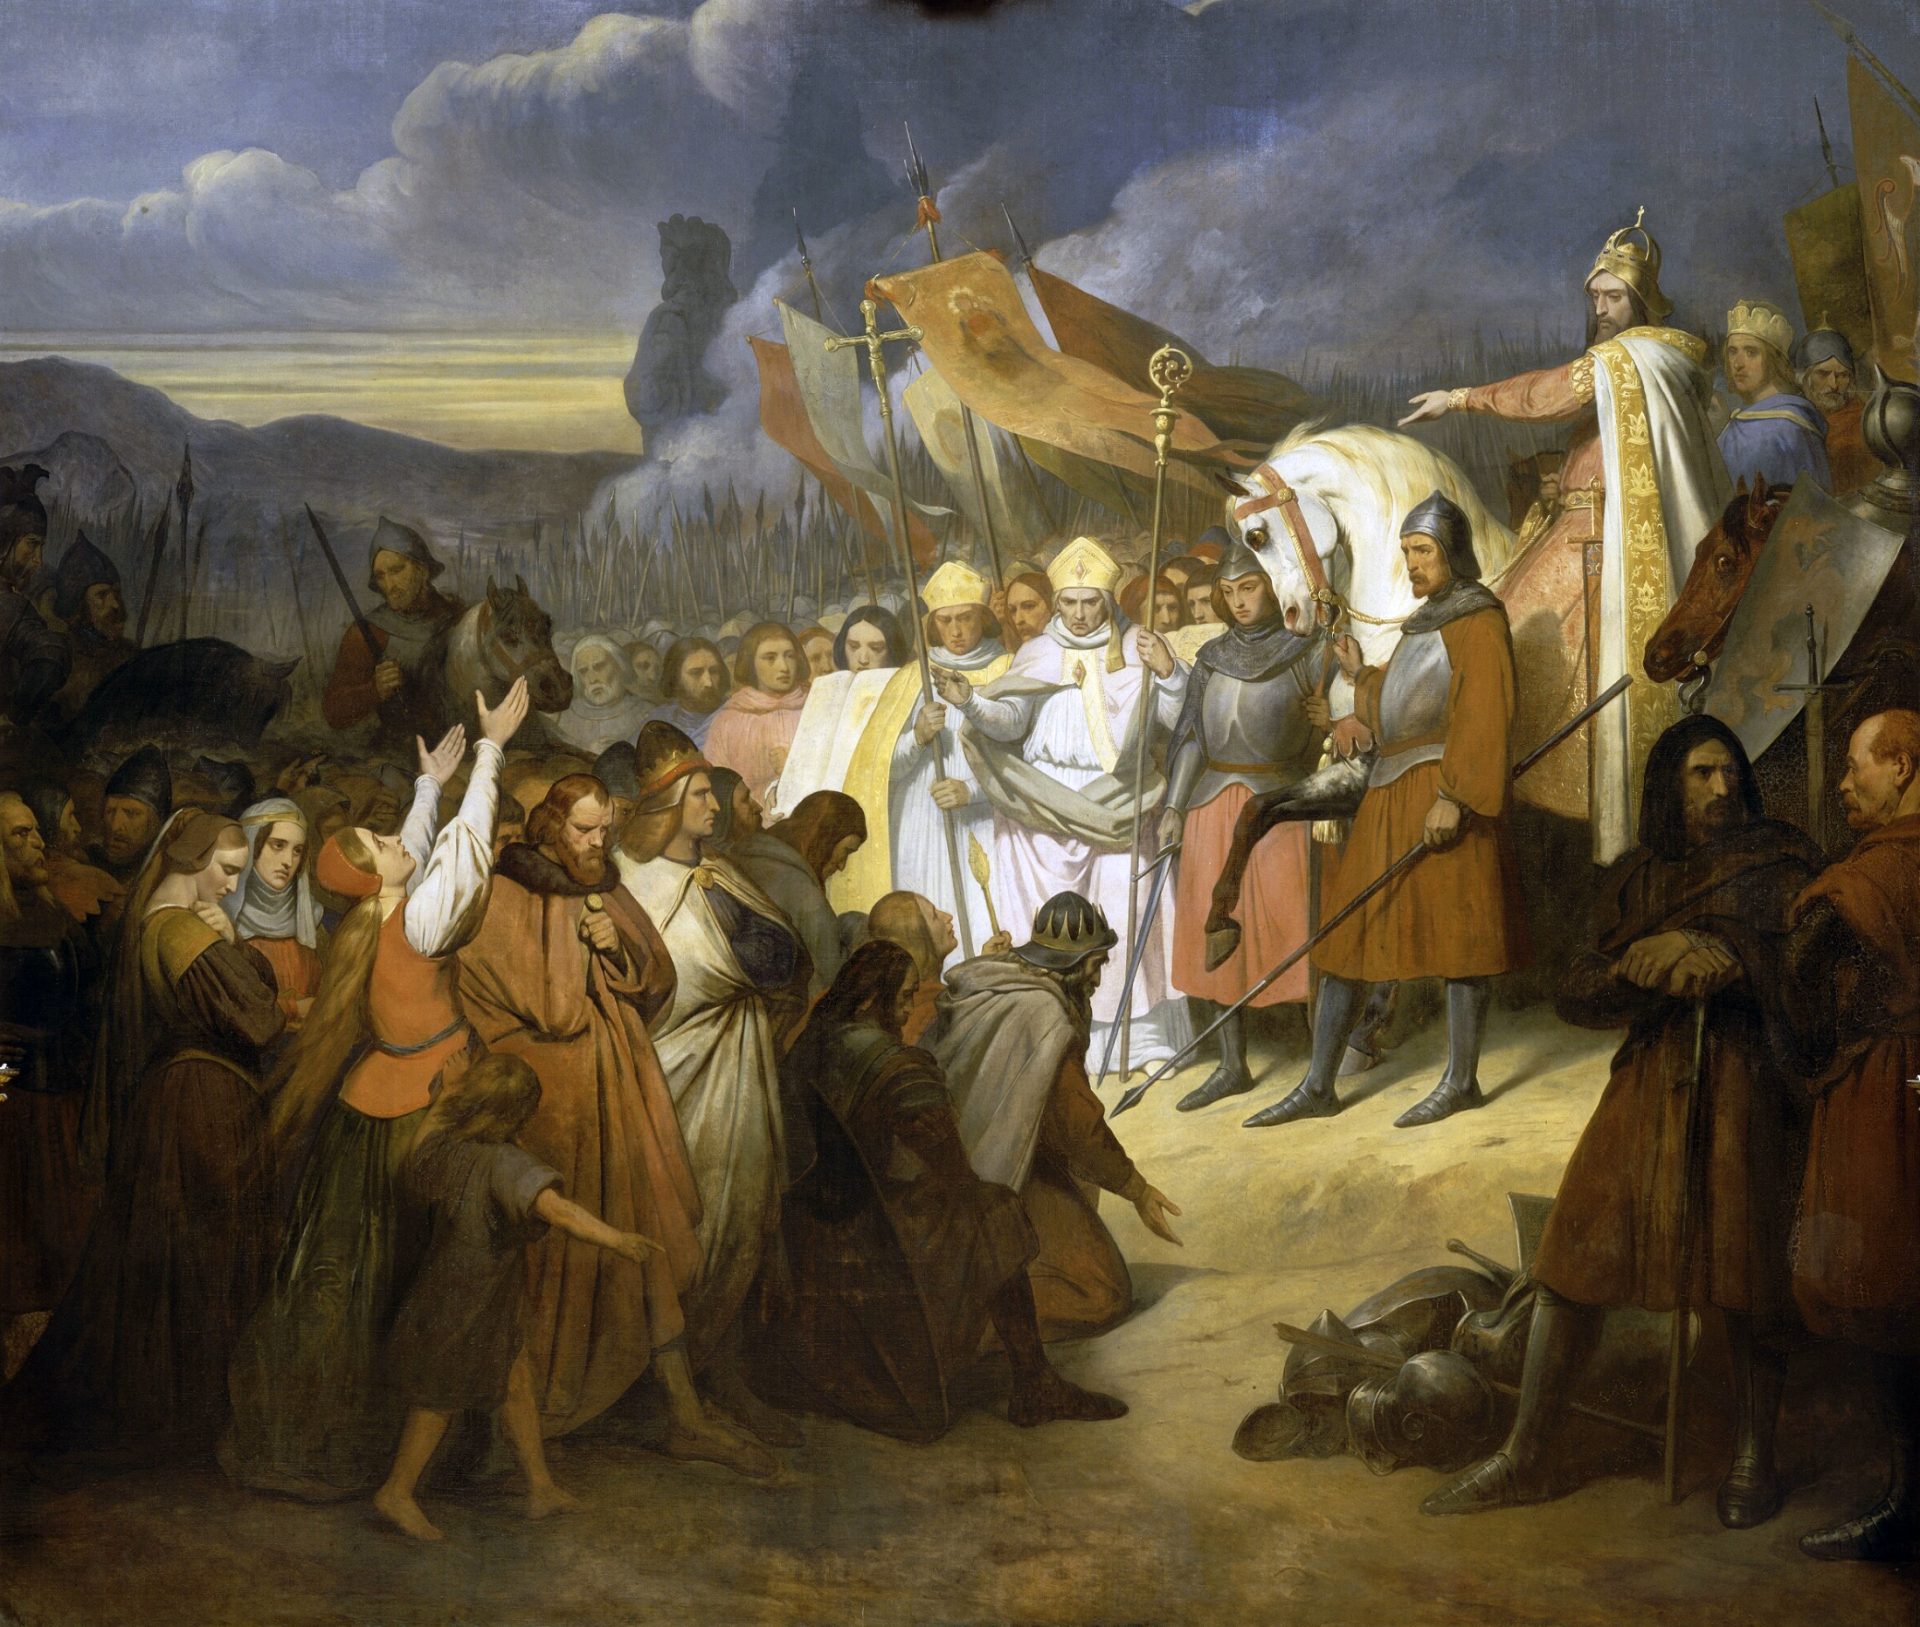 A historical painting depicting Charlemagne, the emperor of the Franks, receiving the submission of Widukind, the leader of the Saxons, at Paderborn in 785 CE. The painting shows a scene of a battlefield. Charlemagne is on a white horse, wearing a crown and a white cloak. Widukind is kneeling before him. Around them are other soldiers and nobles, some wearing armor and carrying weapons, some holding banners and shields. The painting has a dark and somber mood, with a cloudy sky and muted colors. The painting is by Ary Scheffer, a French-Dutch painter, and was made in 1835 CE. The painting is currently in the Palace of Versailles.